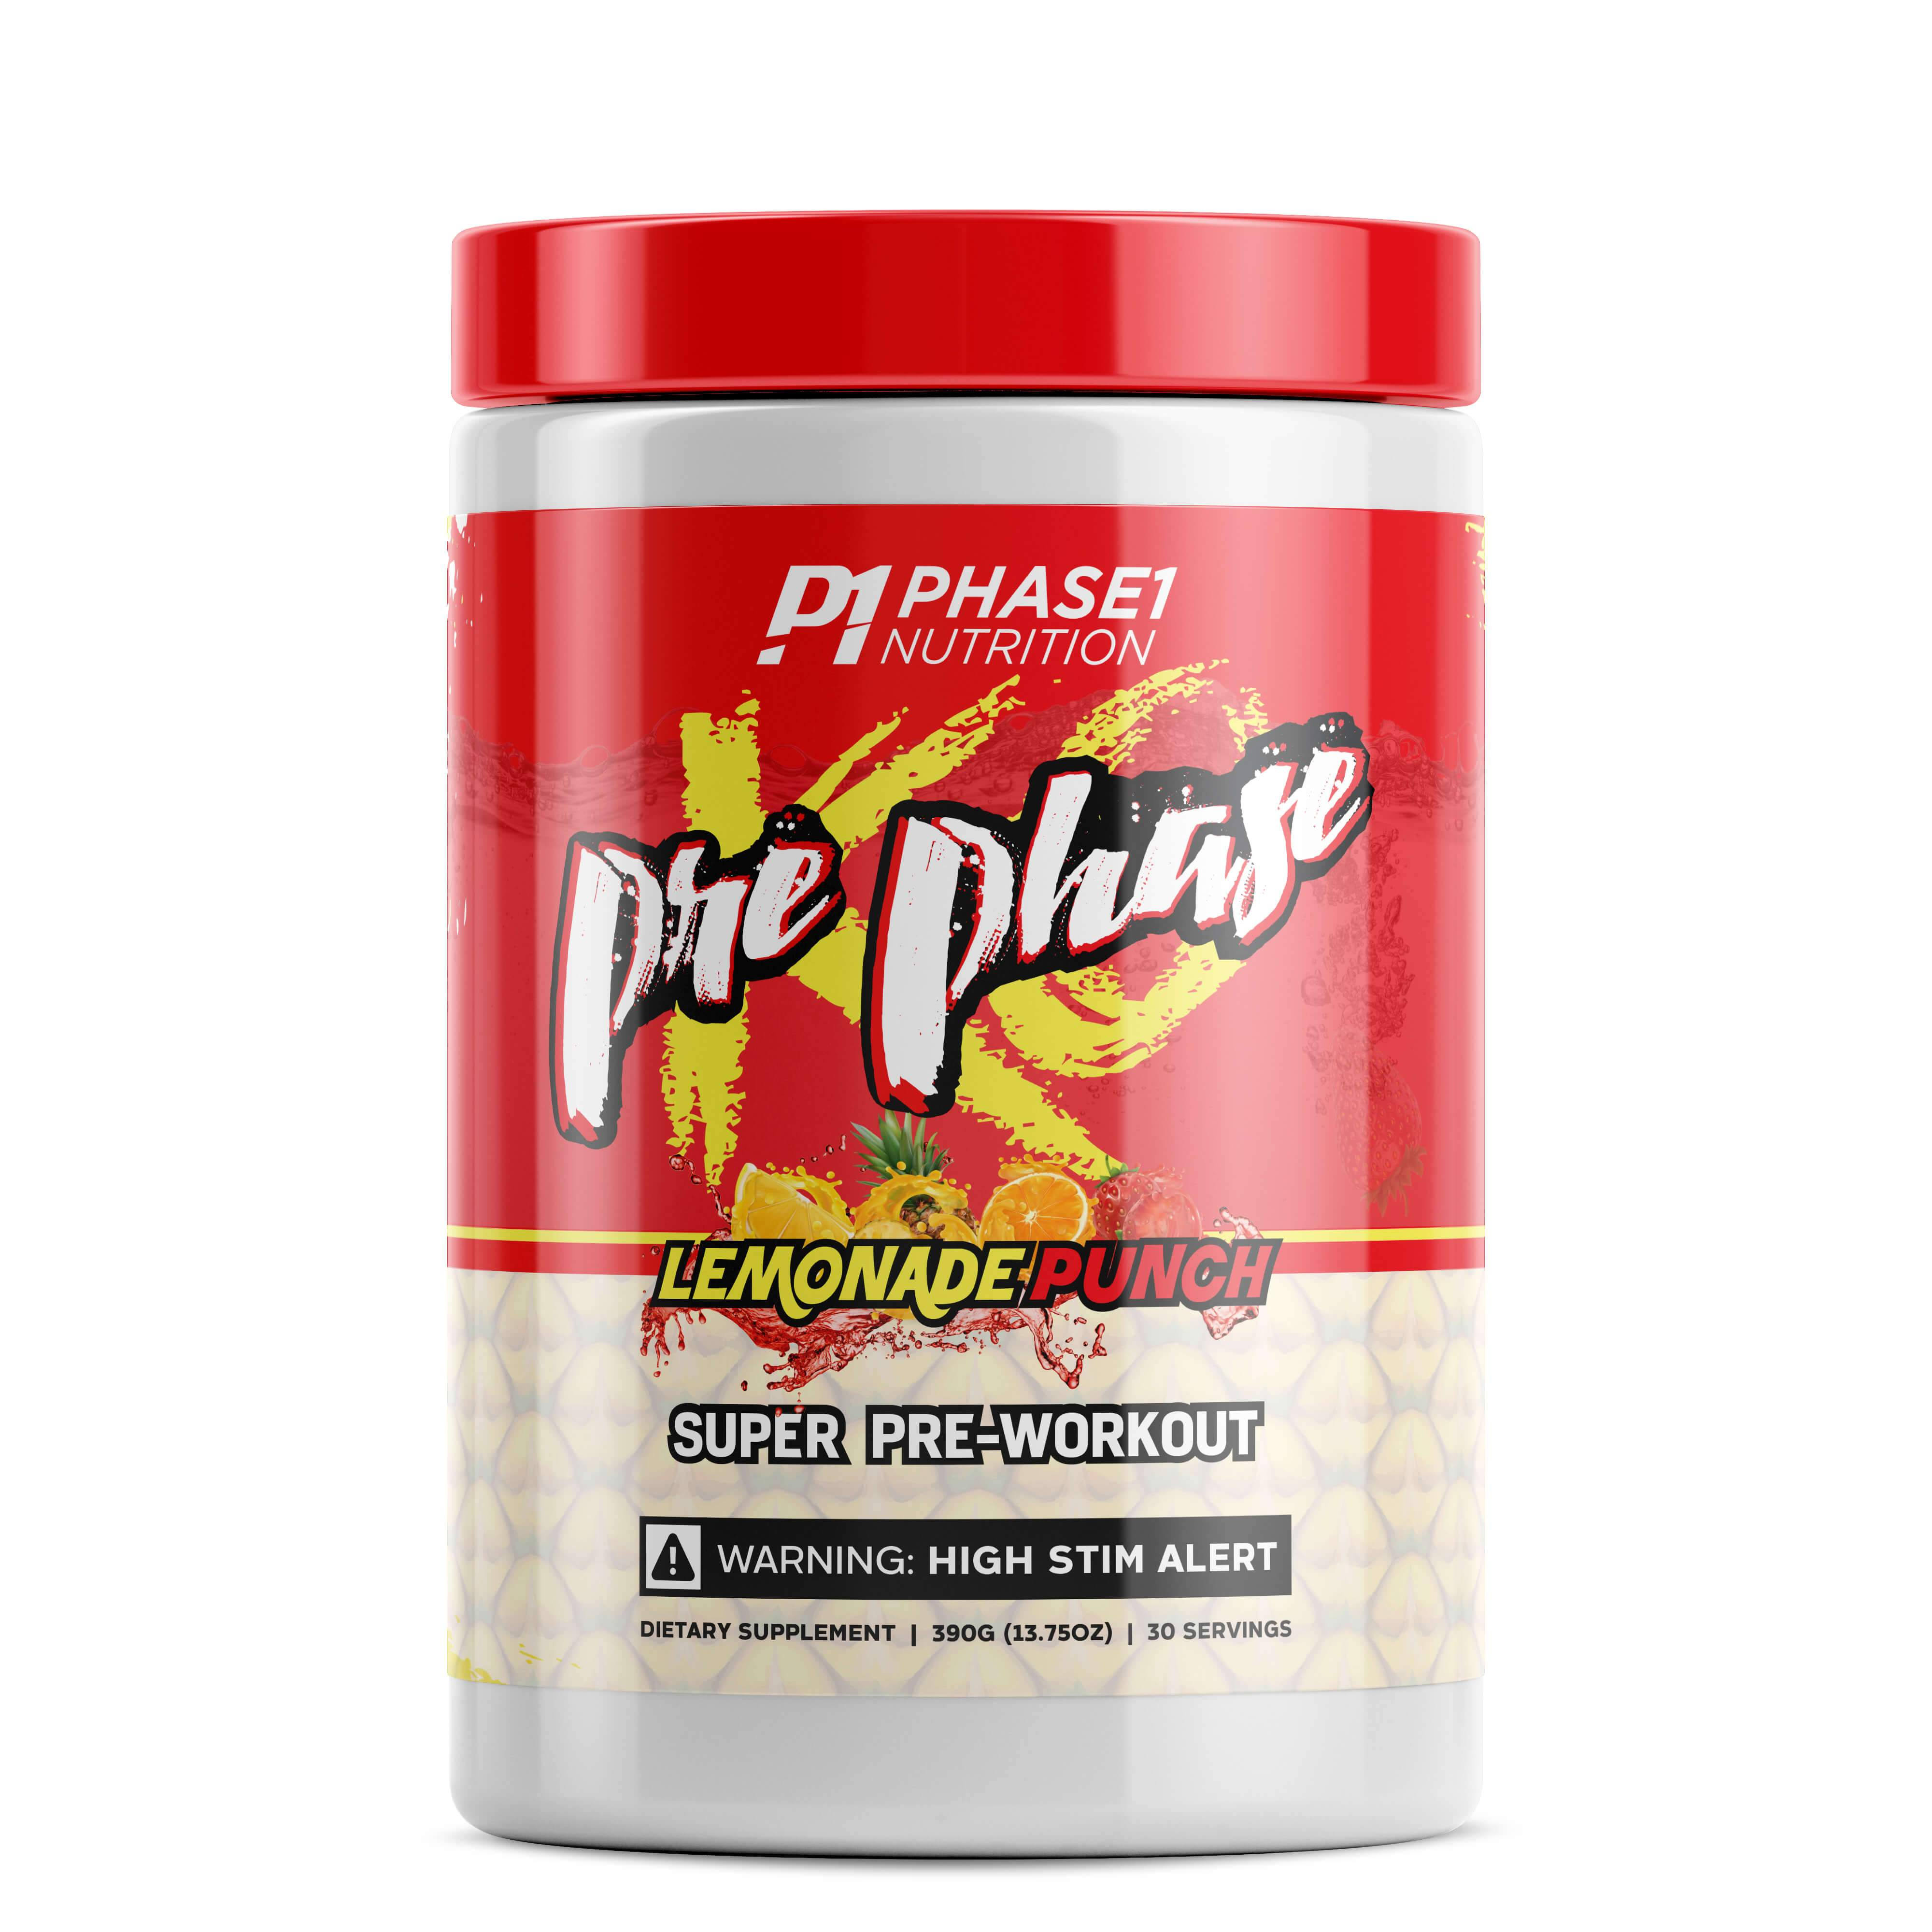 Phase One Nutrition Prephase 30 Servings, Lemonade Punch